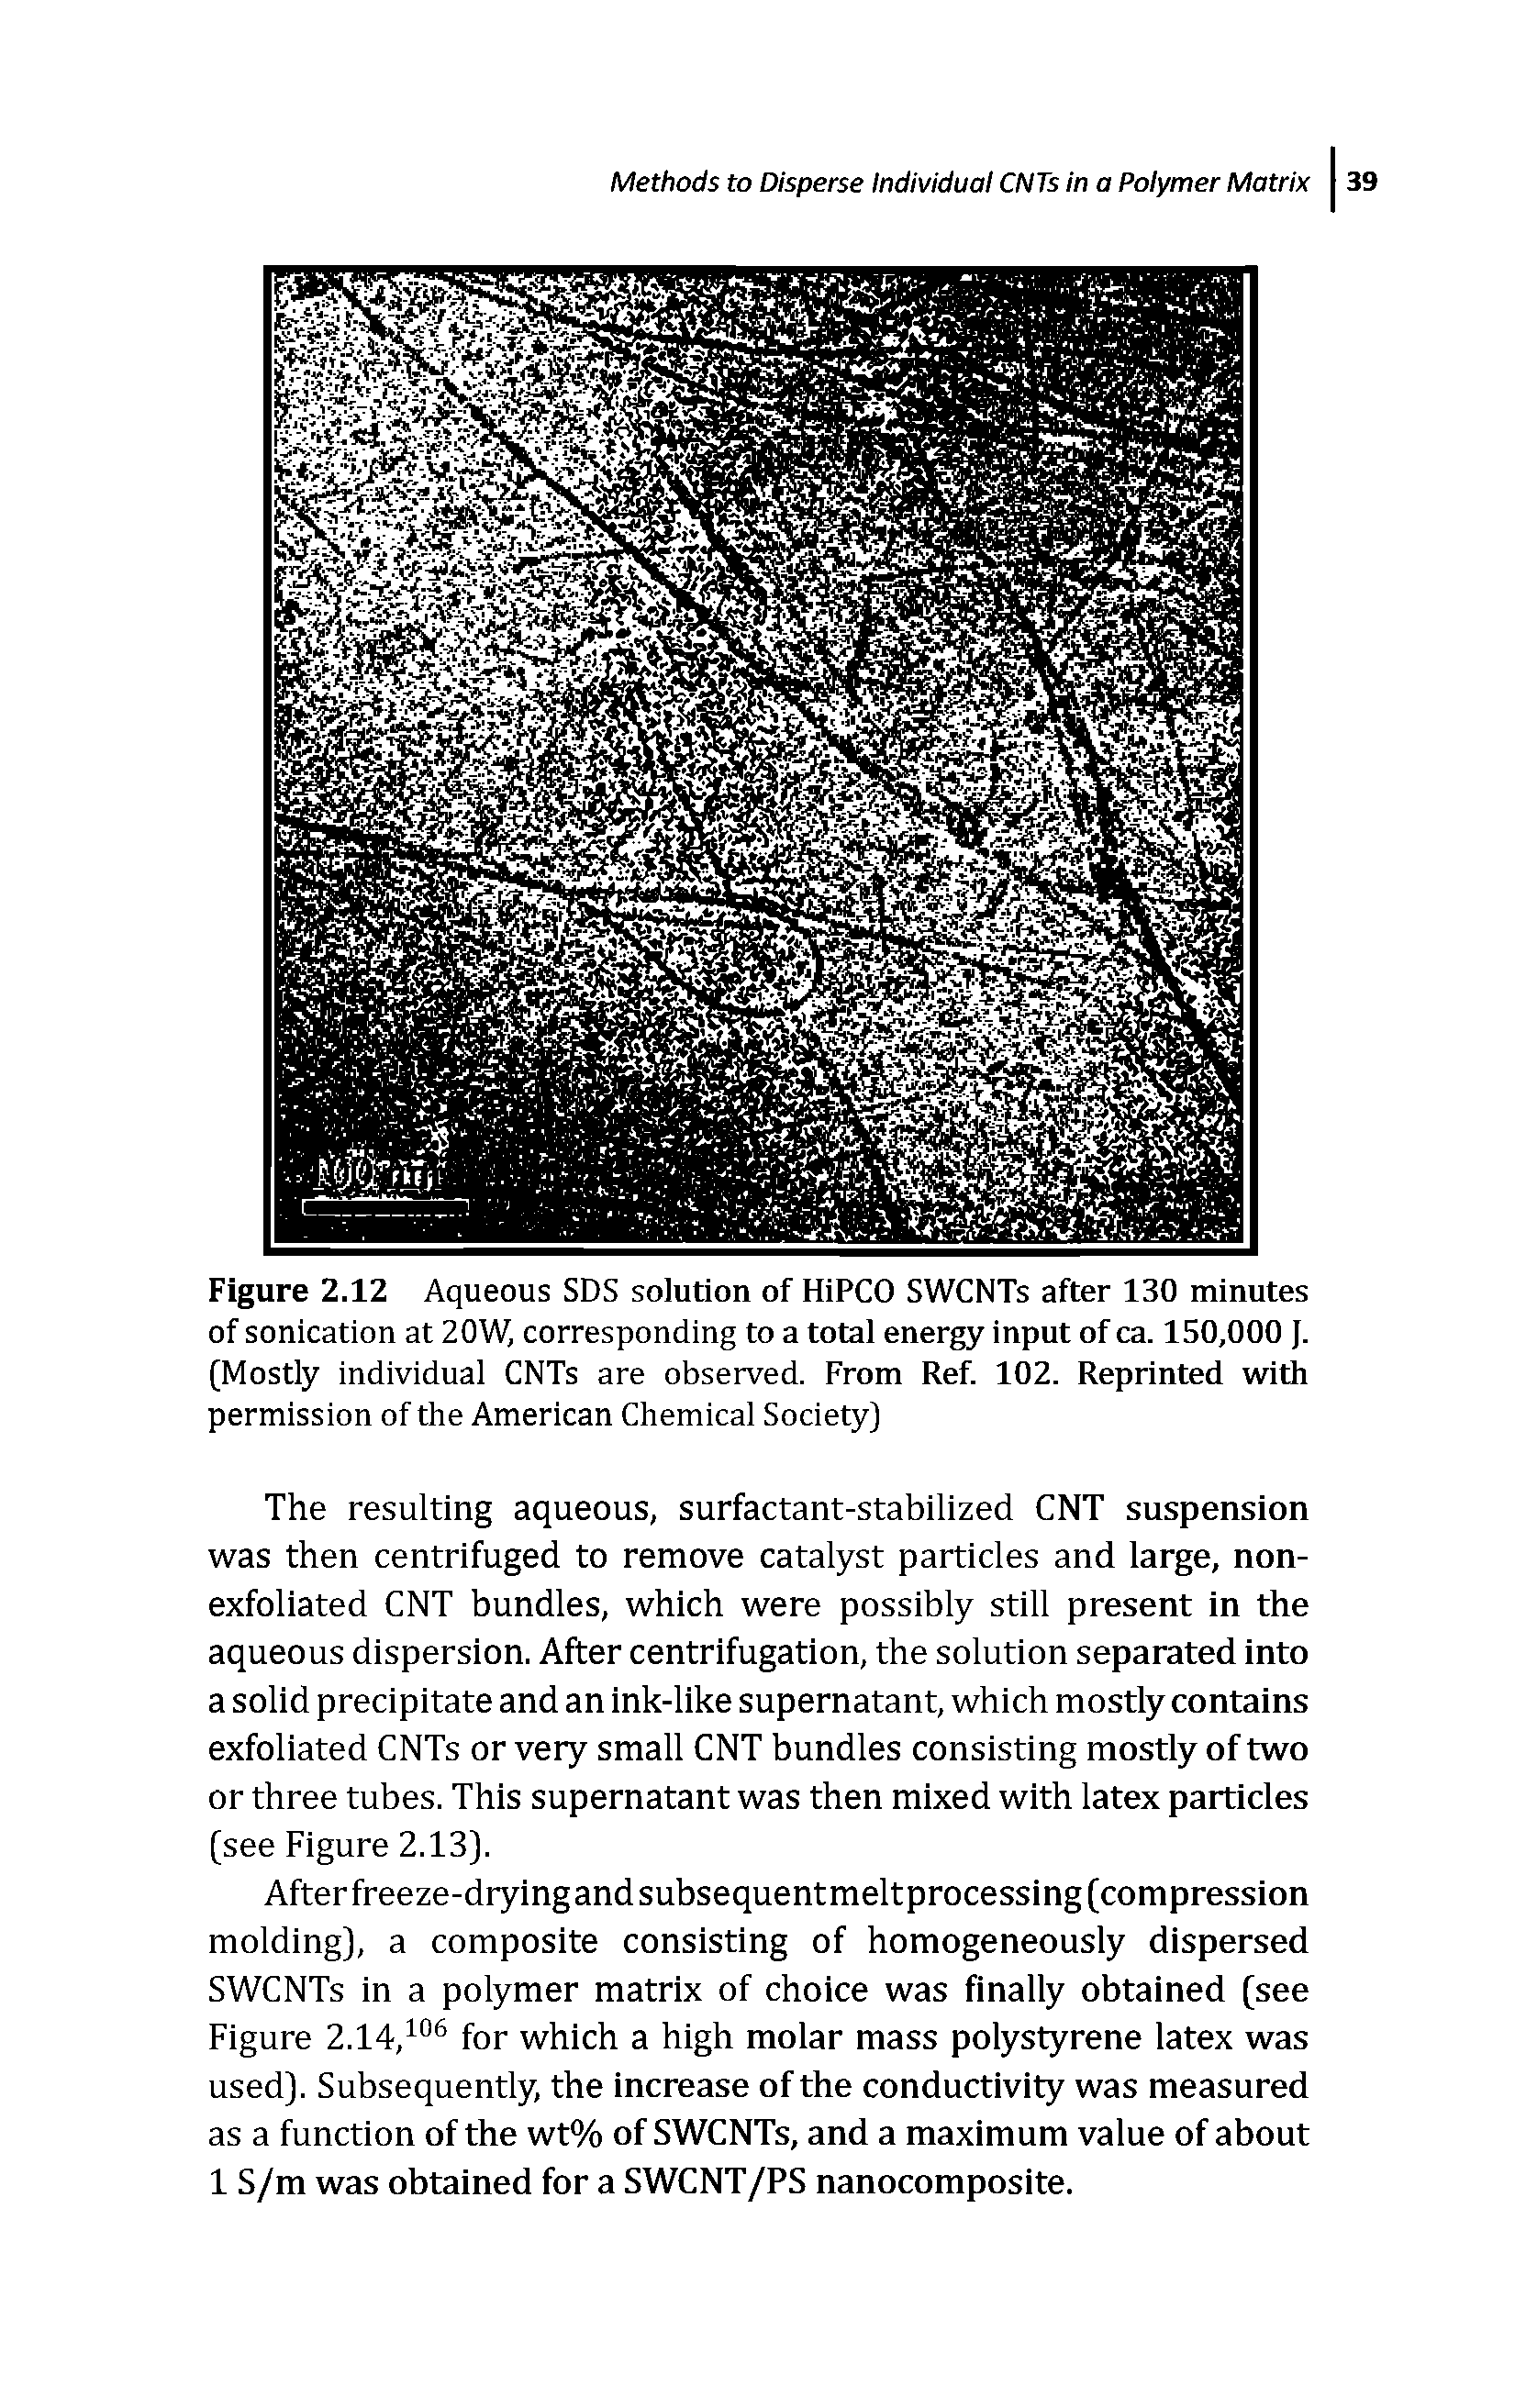 Figure 2.12 Aqueous SDS solution of HiPCO SWCNTs after 130 minutes of sonication at 20W, corresponding to a total energy input of ca. 150,000 J. (Mostly individual CNTs are observed. From Ref. 102. Reprinted with permission of the American Chemical Society)...